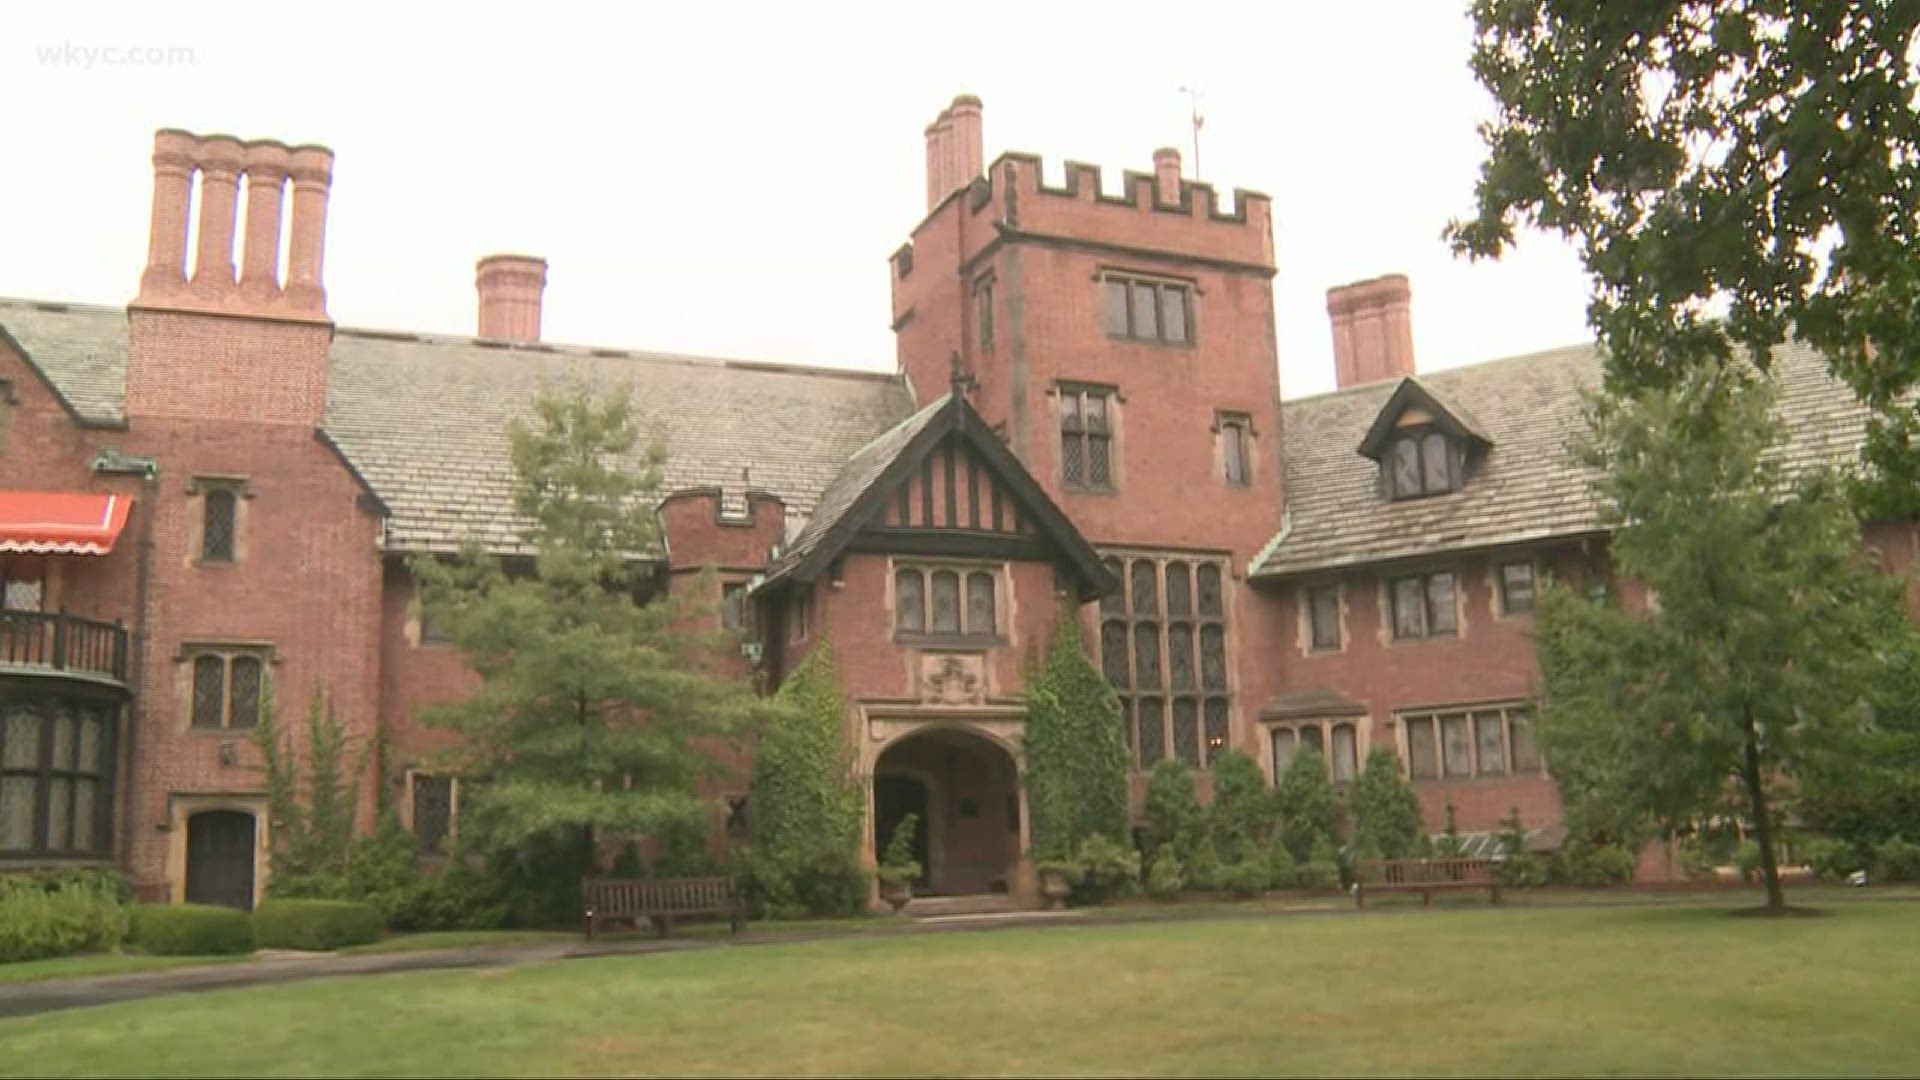 If you’ve been hoping for some fresh scenery, Stan Hywet is here for you. The Akron landmark will begin opening its grounds Friday for visitors to walk and explore.